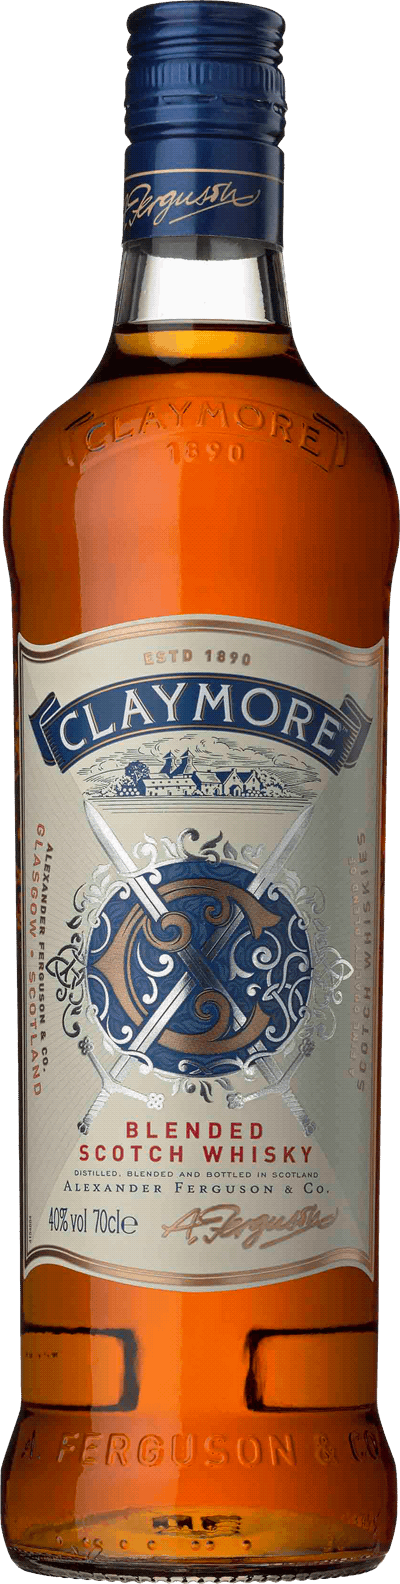 Claymore Blended